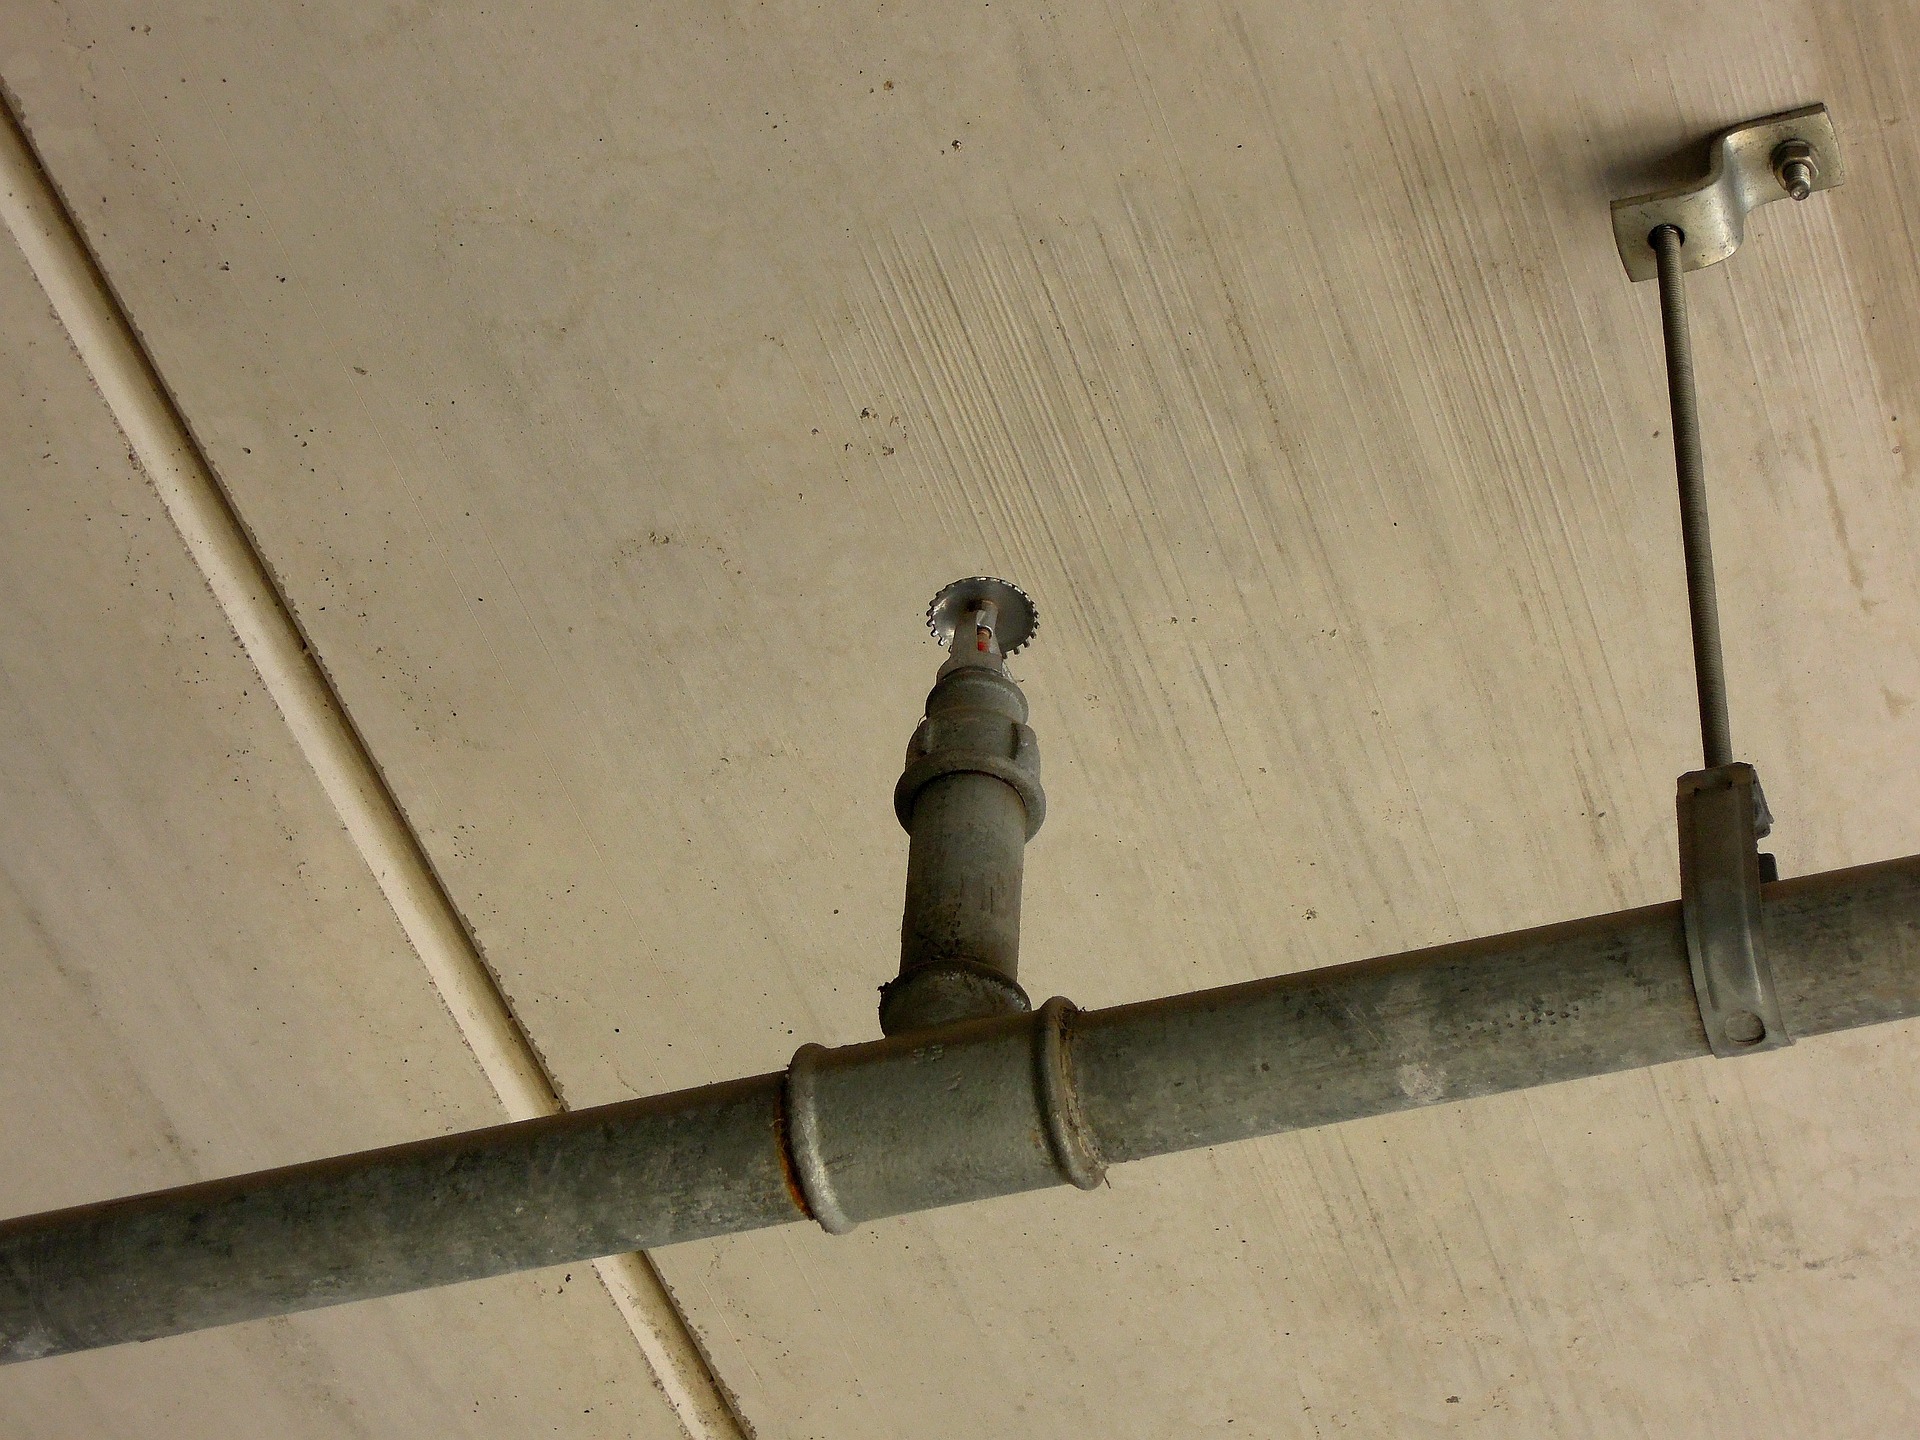 What Causes Fire Sprinkler Water Loss and How to Prevent It